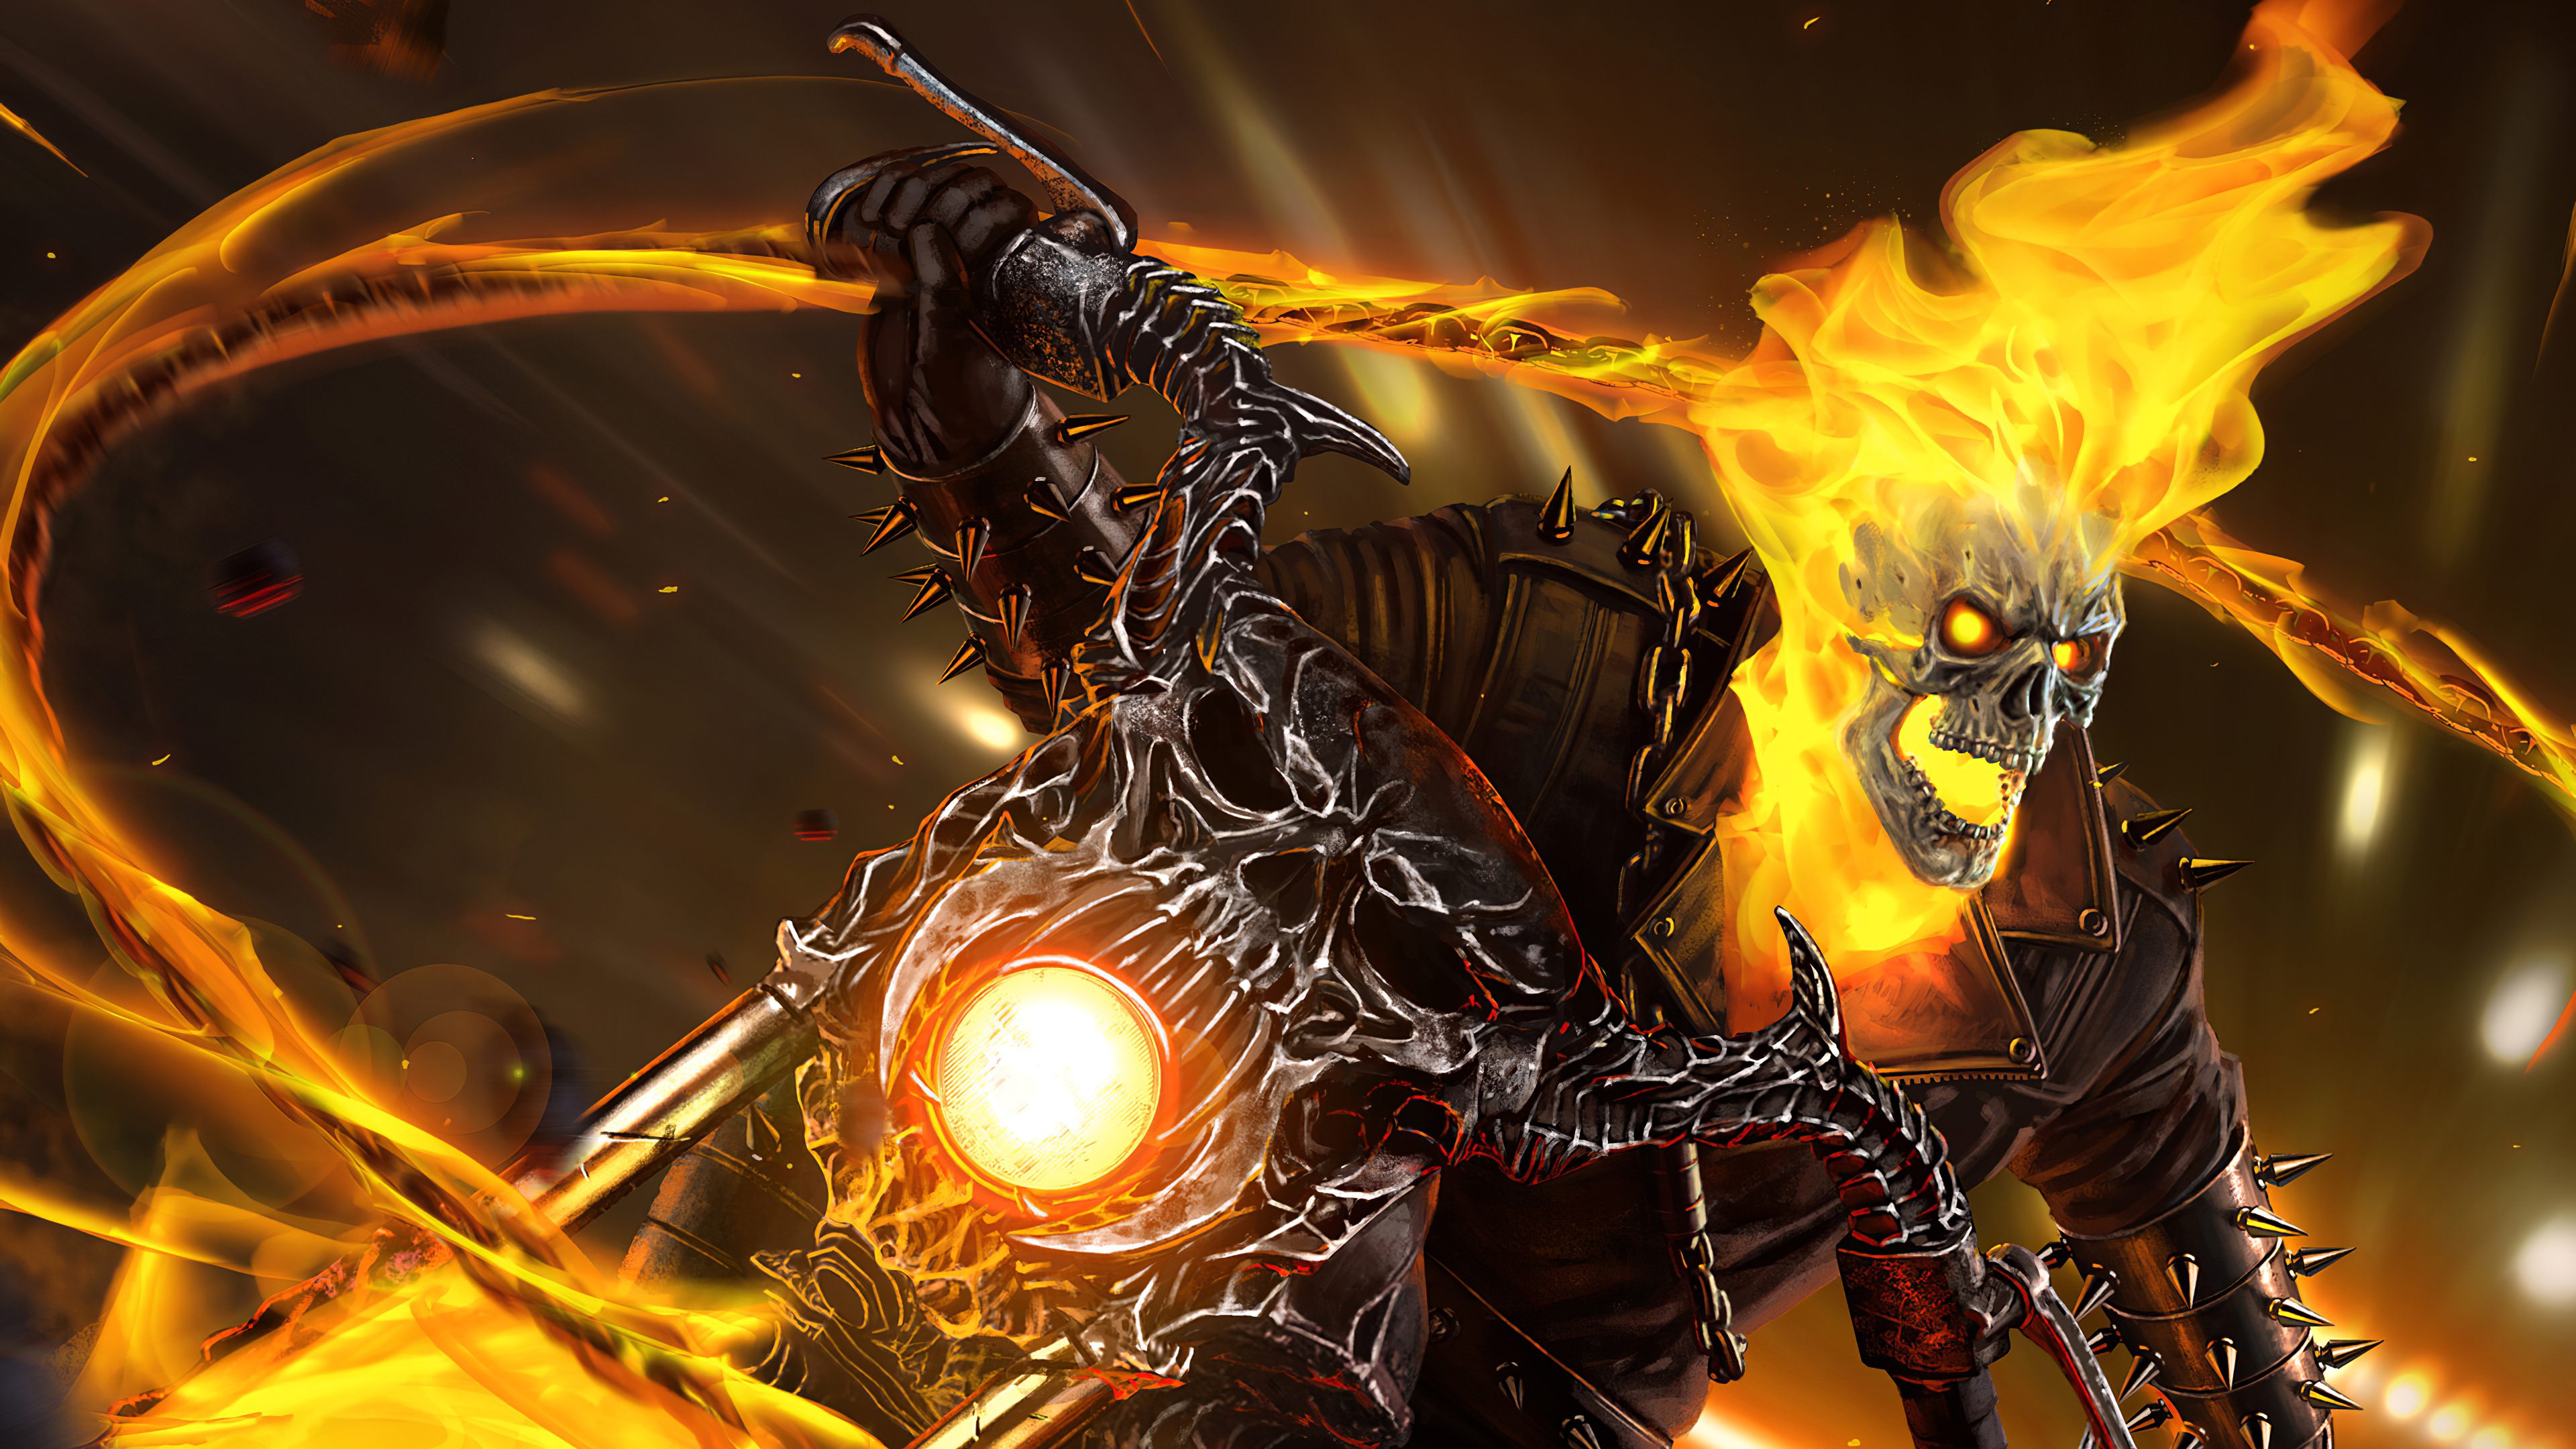 The Ghost Rider Art The Ghost Rider 4k wallpaper, ghost phone wallpaper